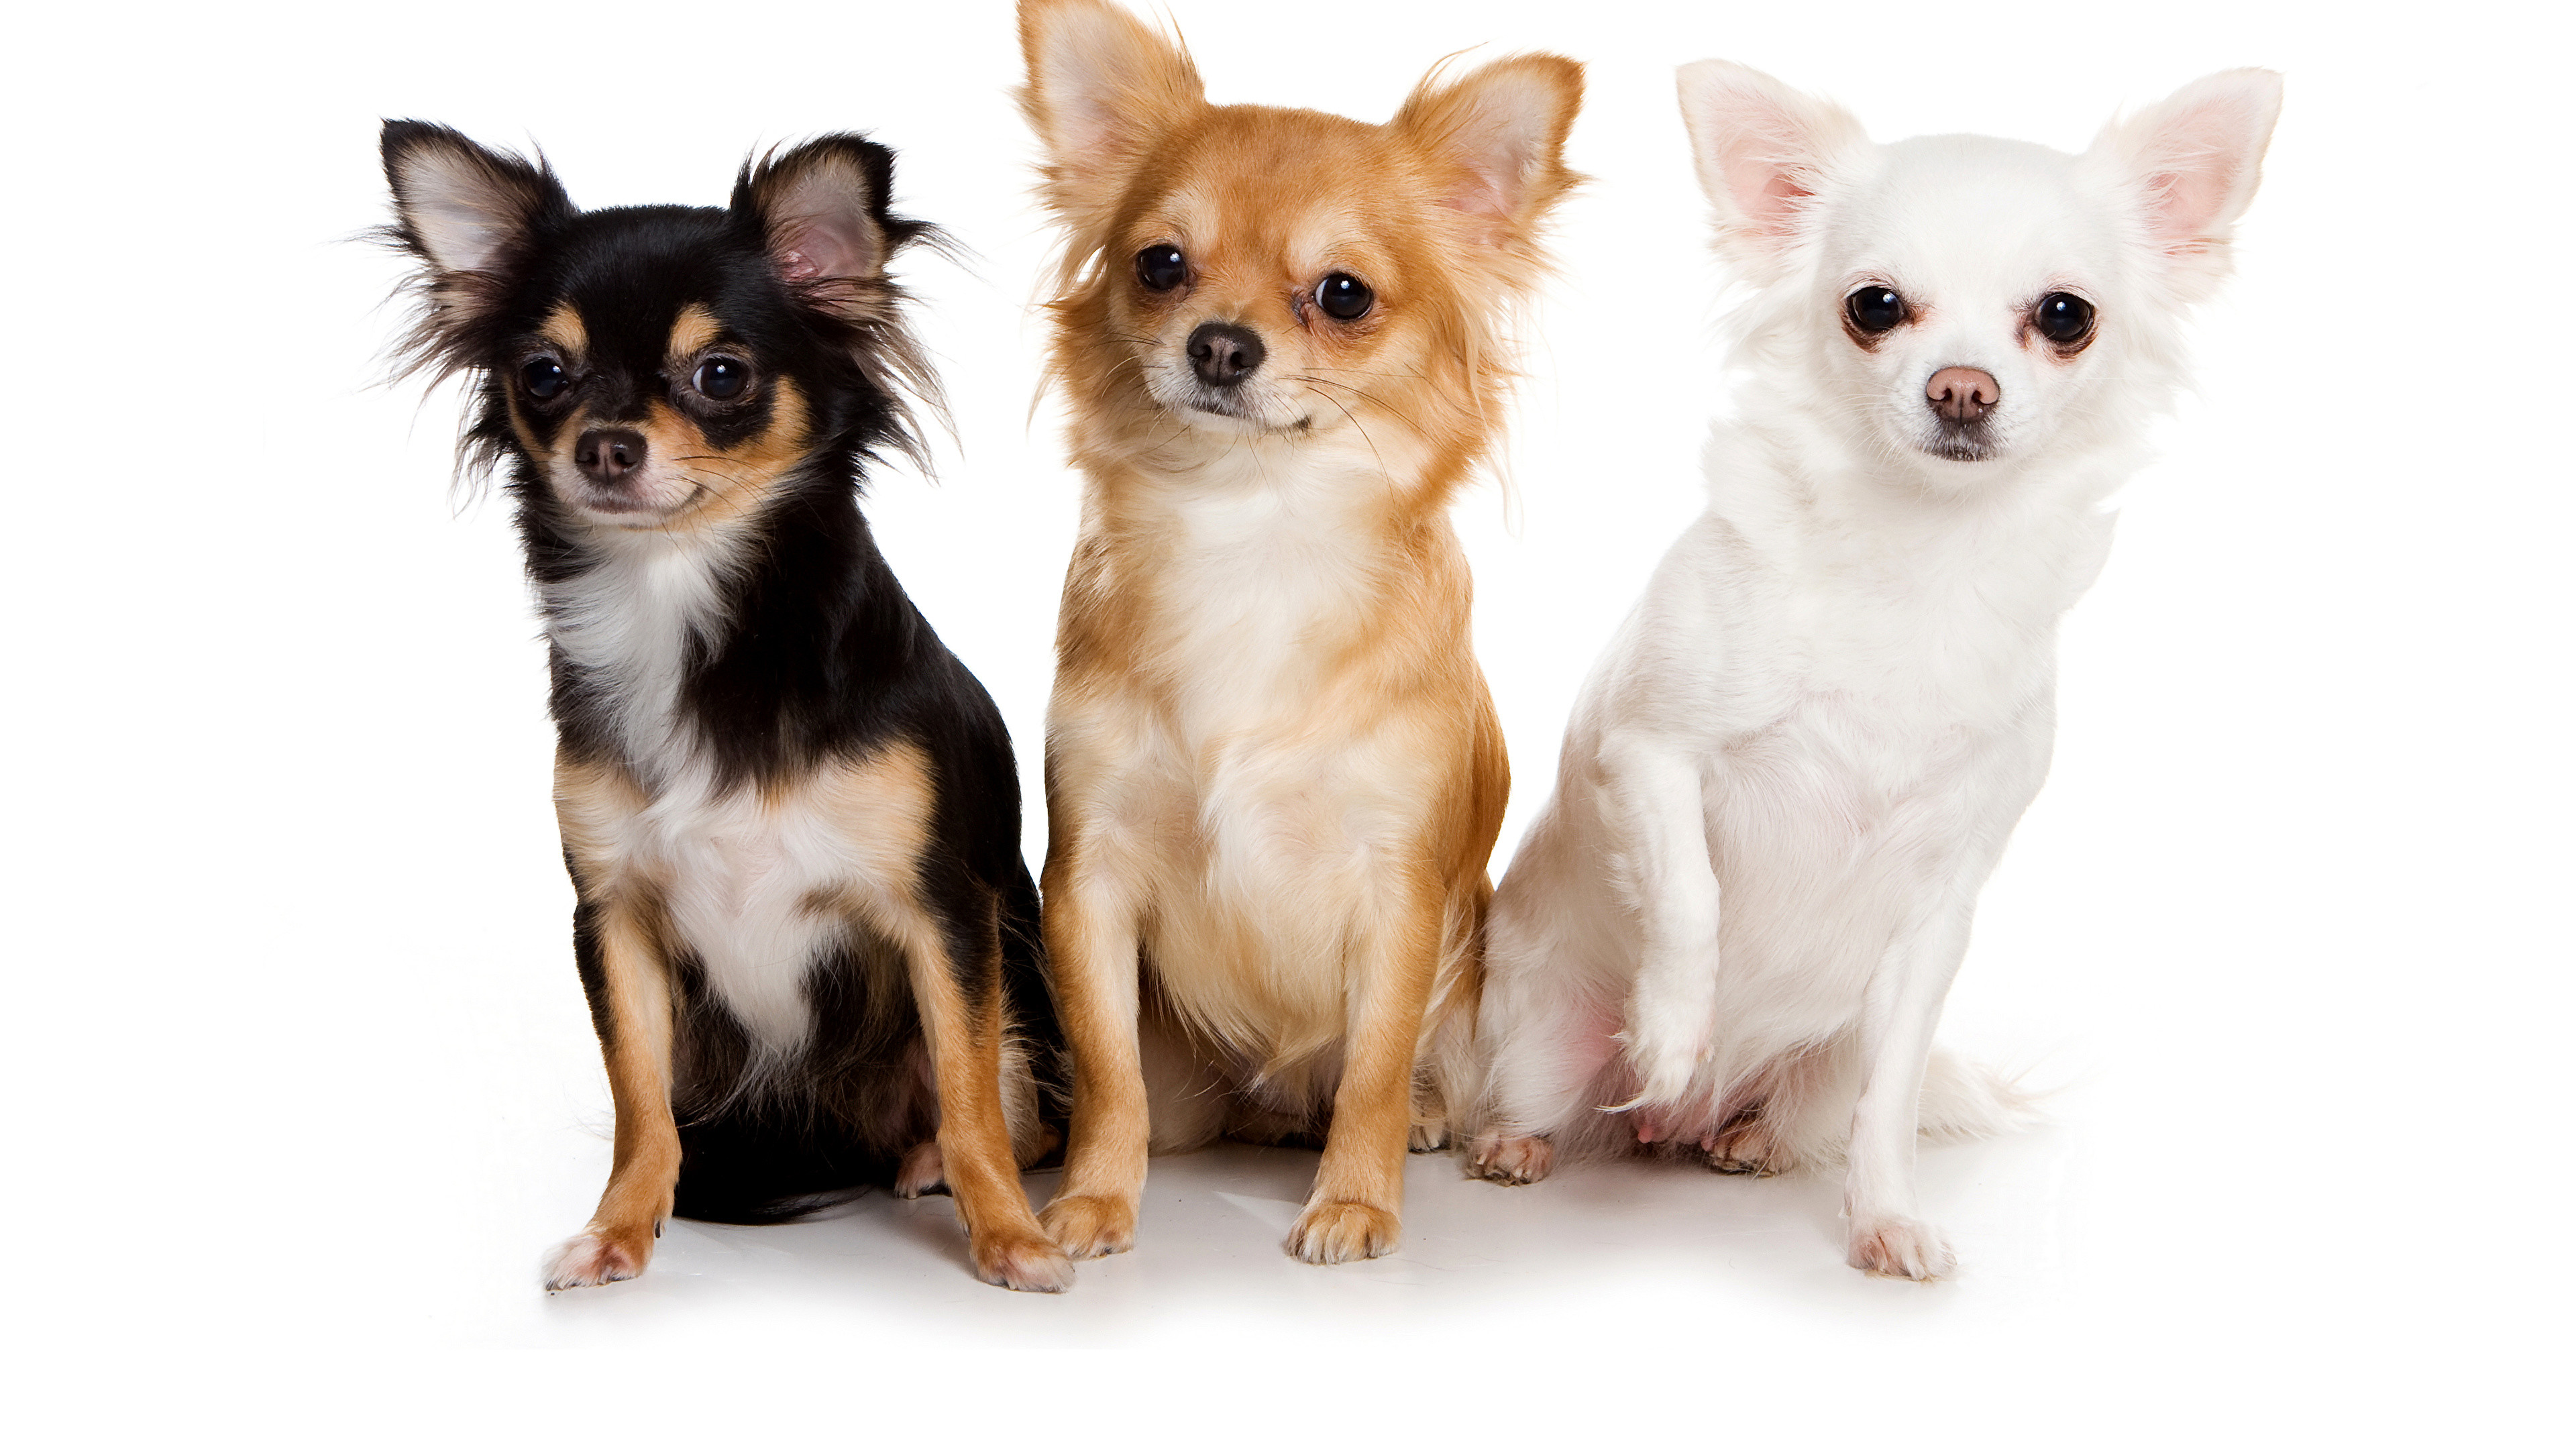 3840x2160 Wallpapers Chihuahua Dogs Three 3 Animals White background 